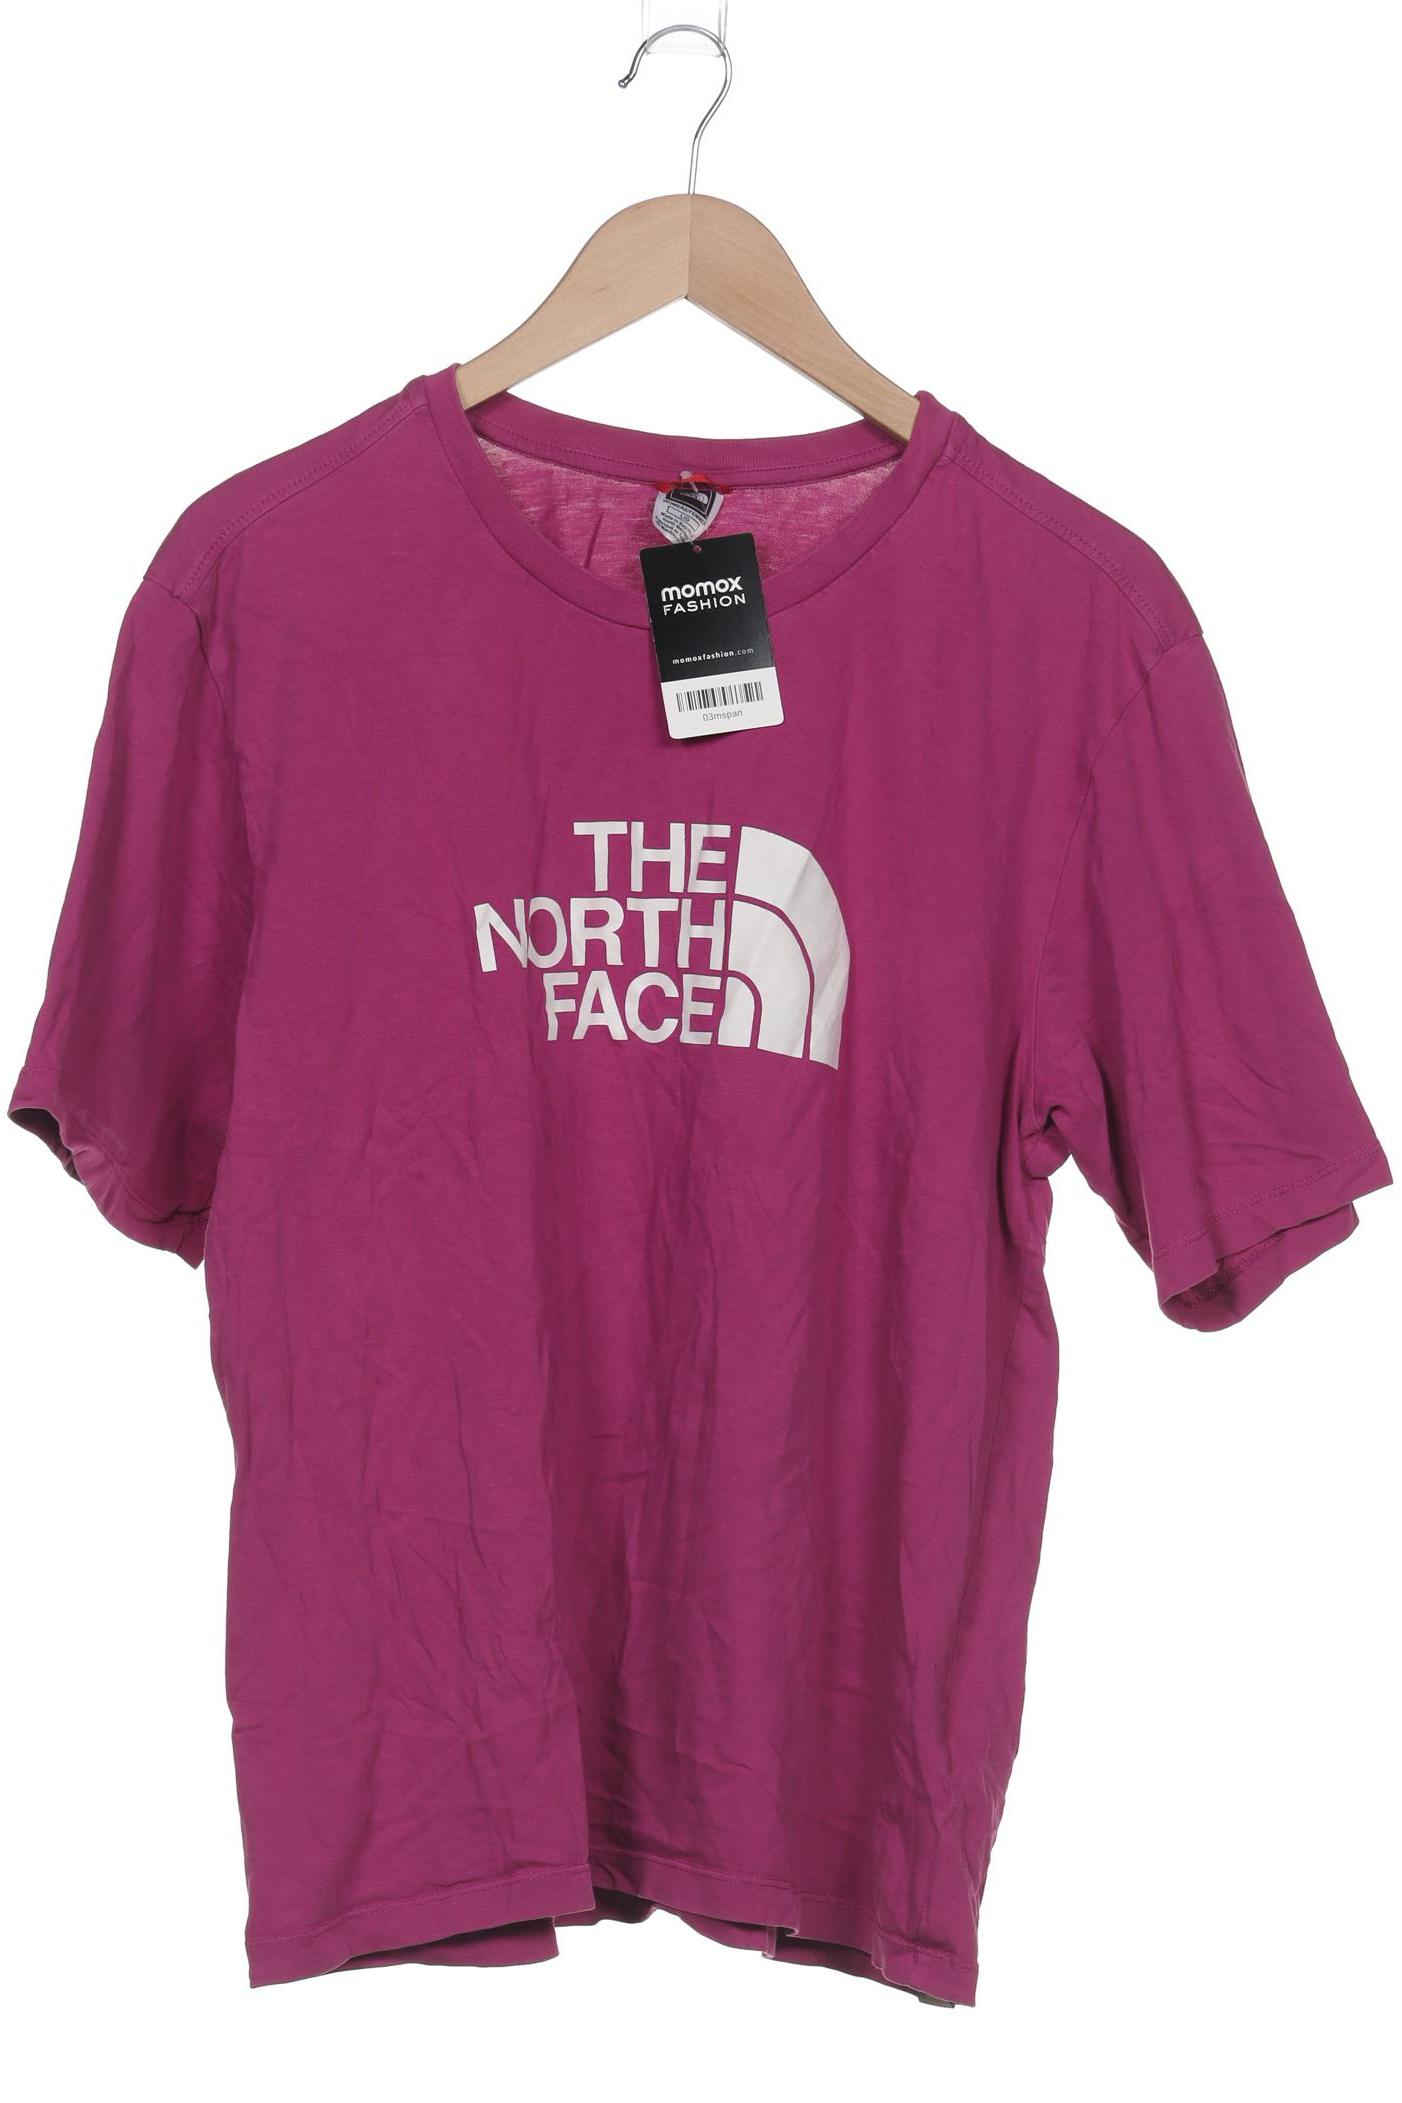 The North Face Damen T-Shirt, pink, Gr. 42 von The North Face